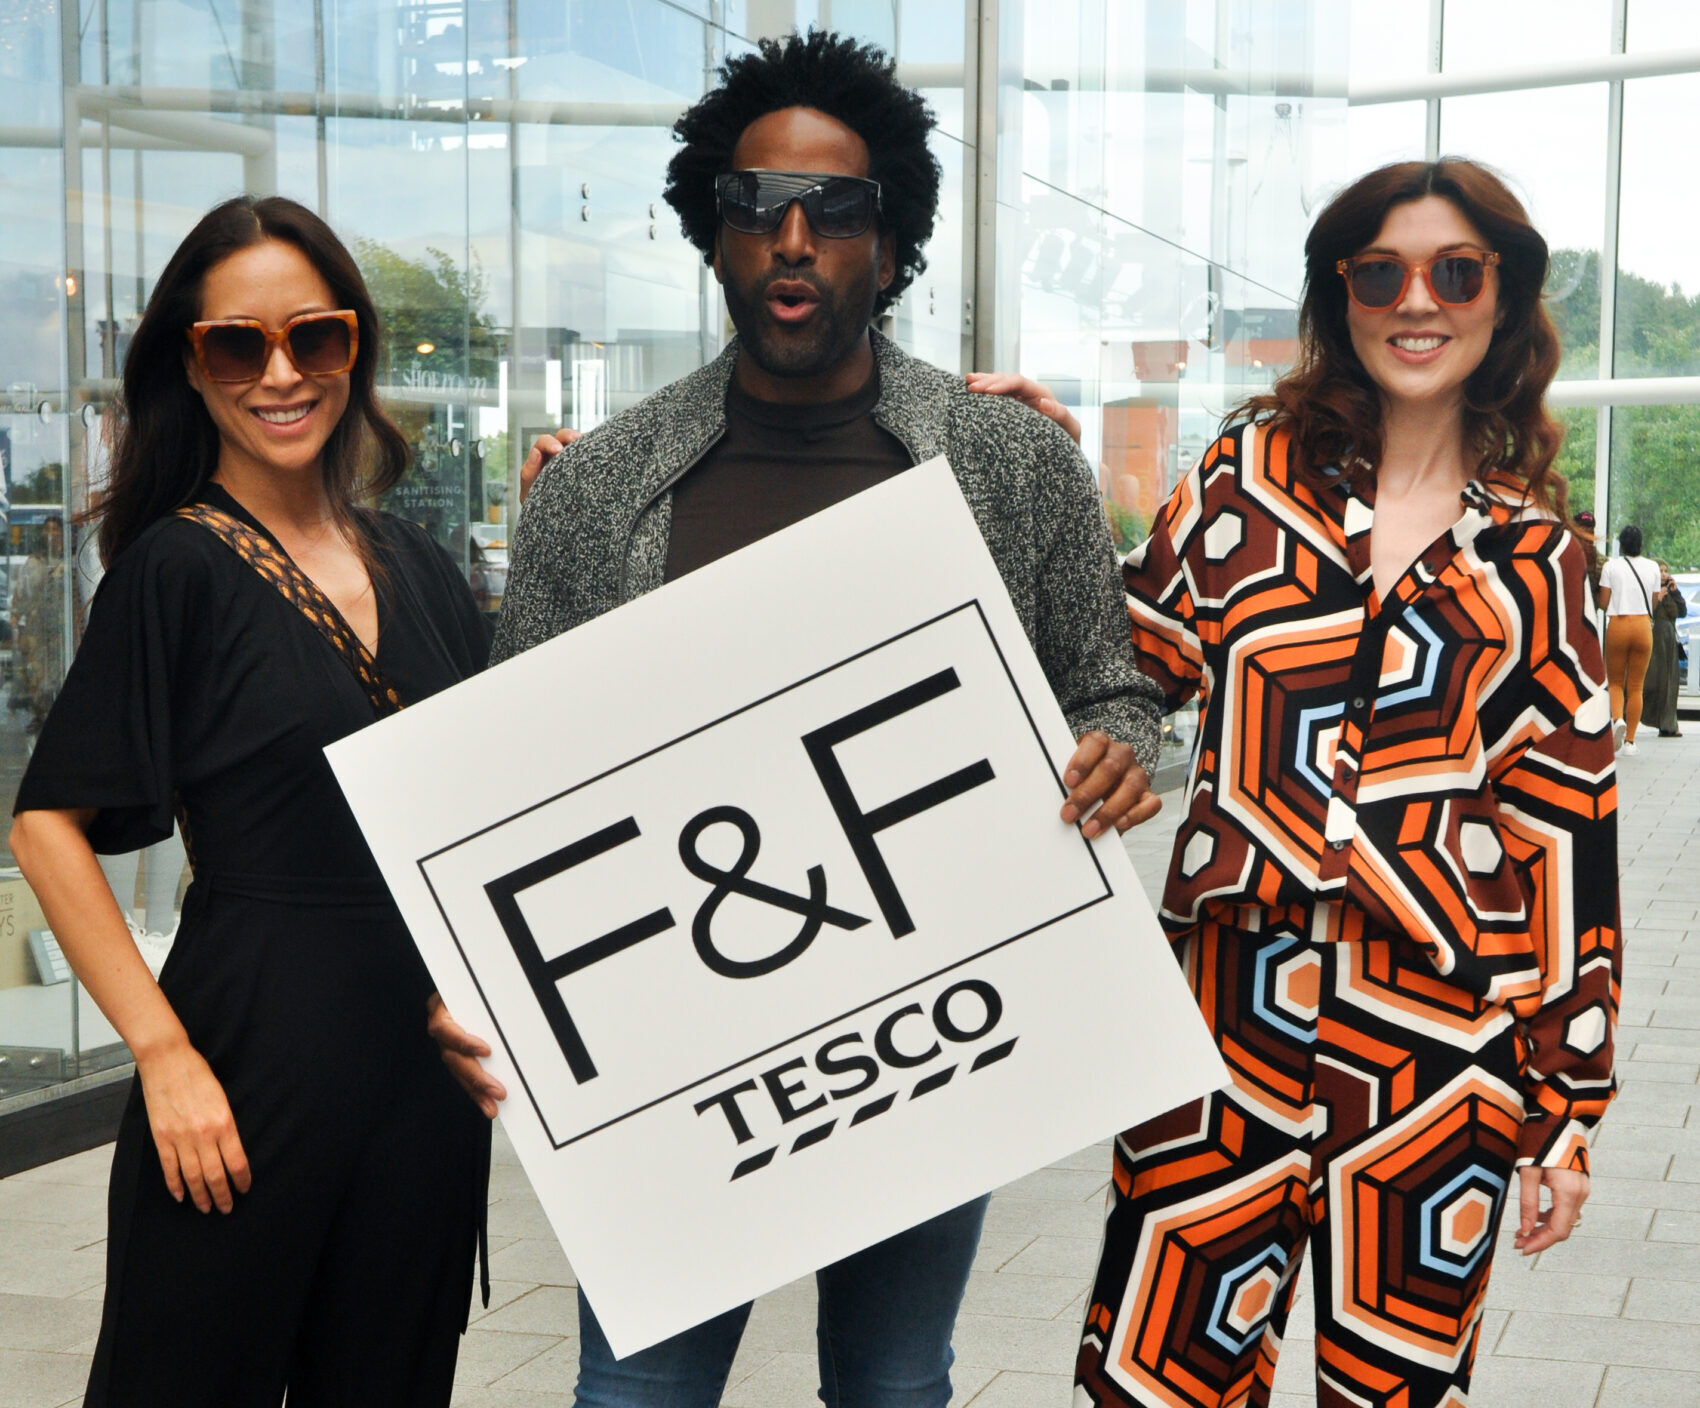 West Bromwich Pop Up Fashion Show – Featuring F&F Clothing from Tesco